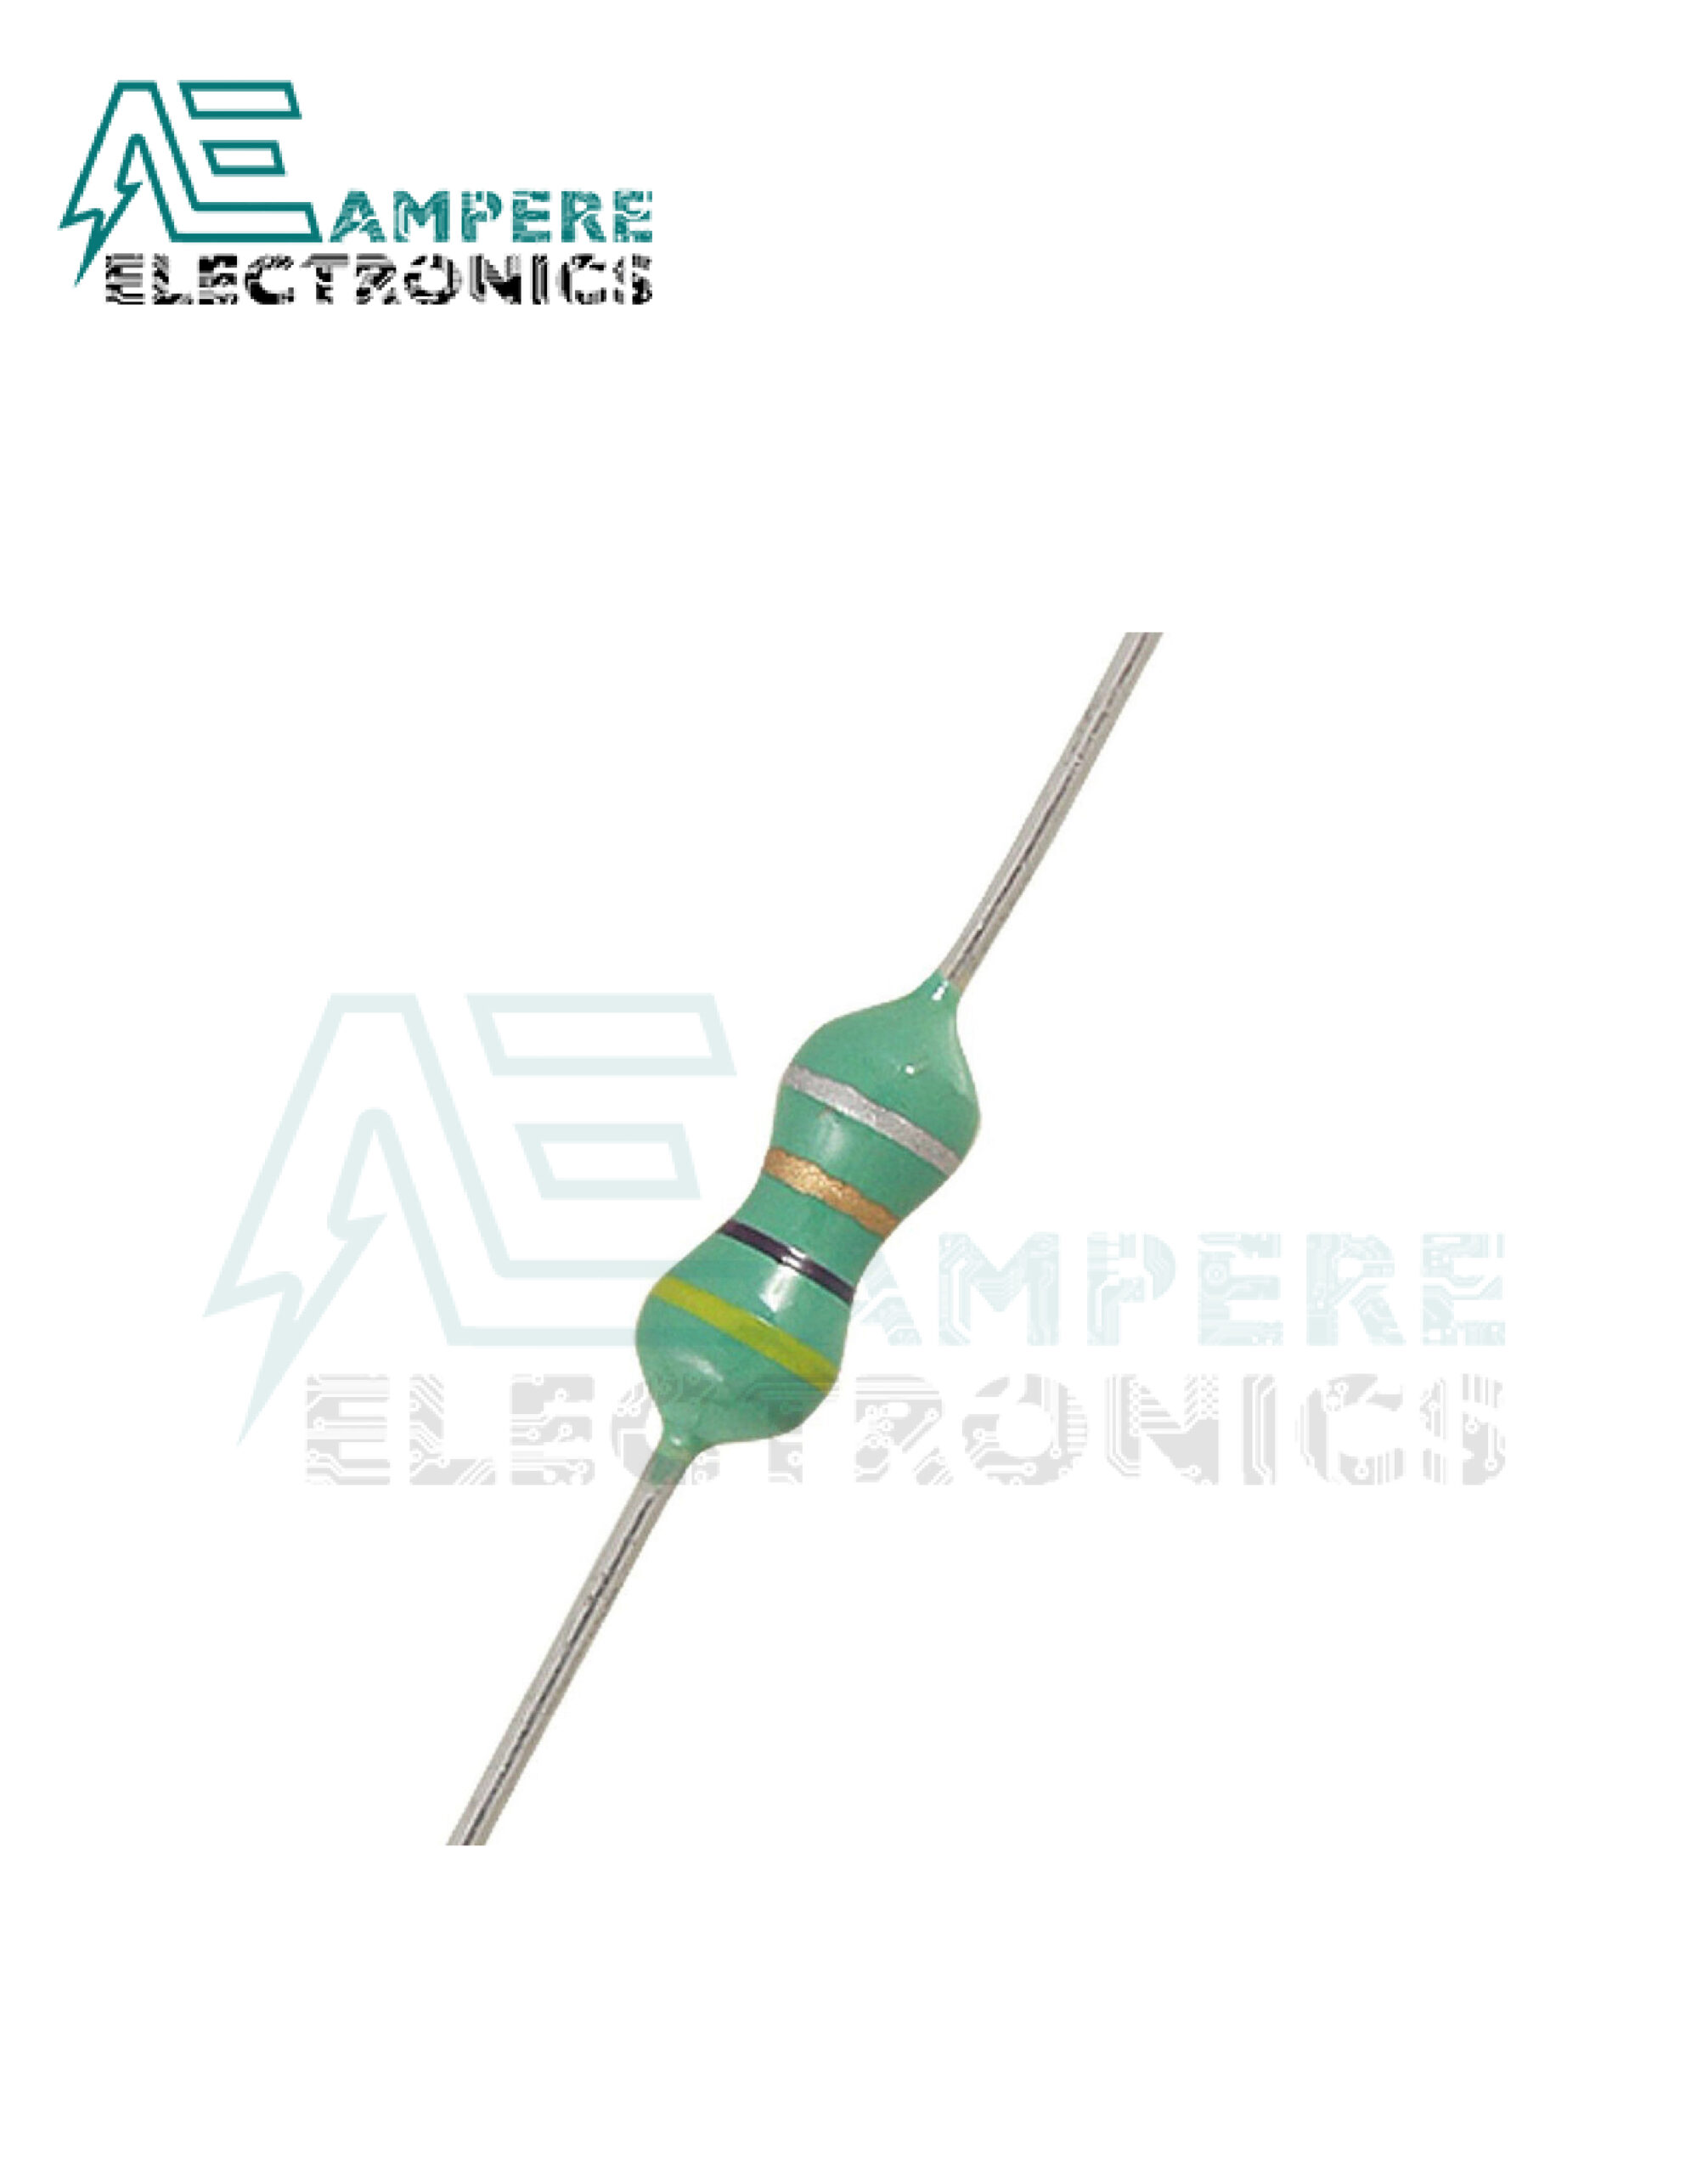 1mh Inductor 14w Ampere Electronics